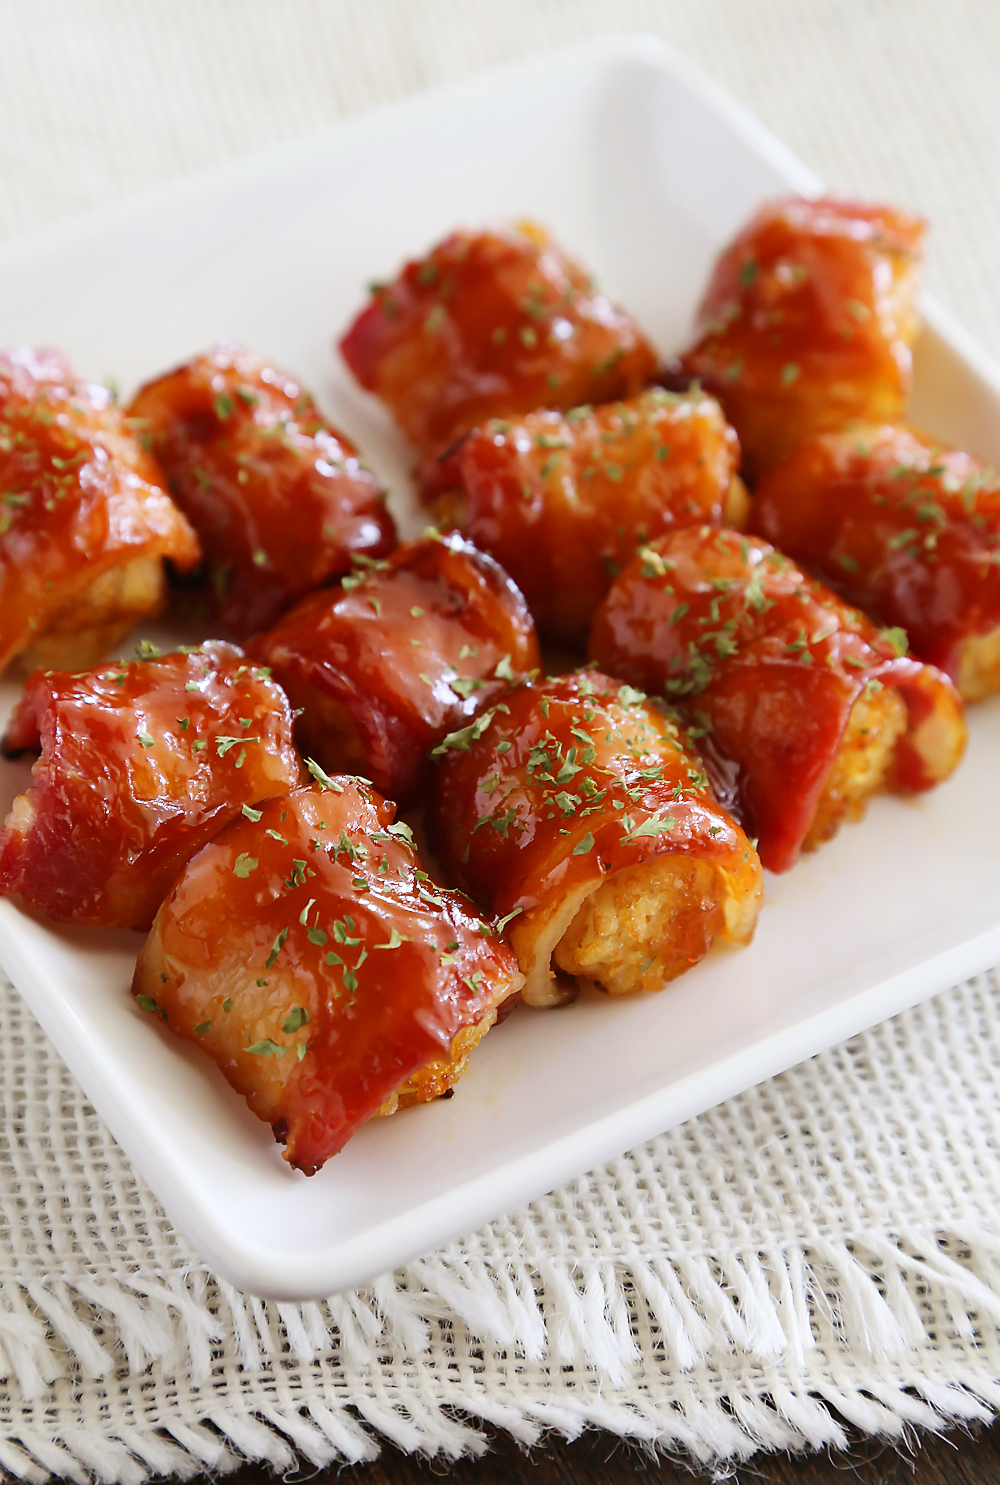 BBQ Bacon Wrapped Tater Tot Bites - Crispy tater tots wrapped in applewood smoked bacon and coated with a tangy homemade barbecue sauce! Thecomfortofcooking.com